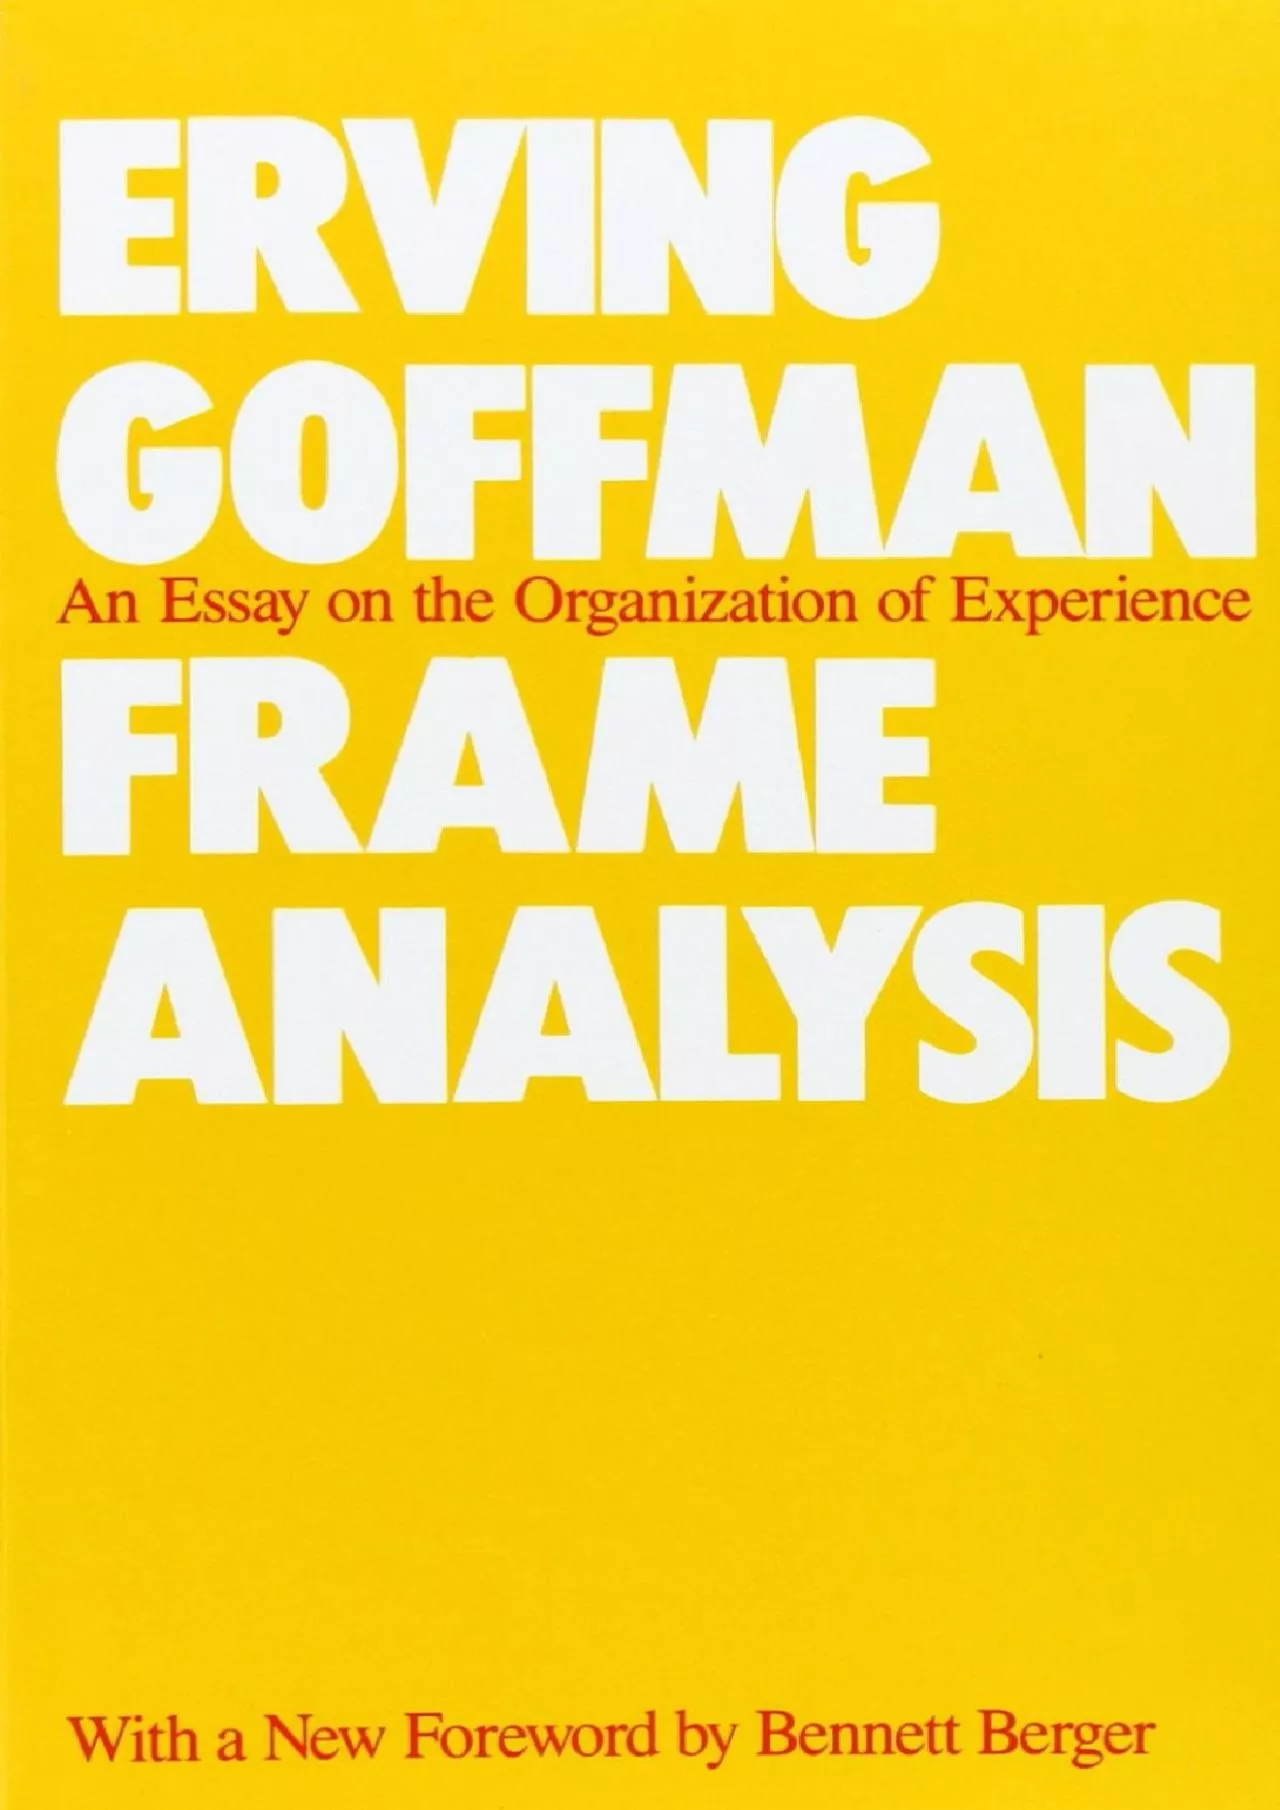 (EBOOK)-Frame Analysis: An Essay on the Organization of Experience